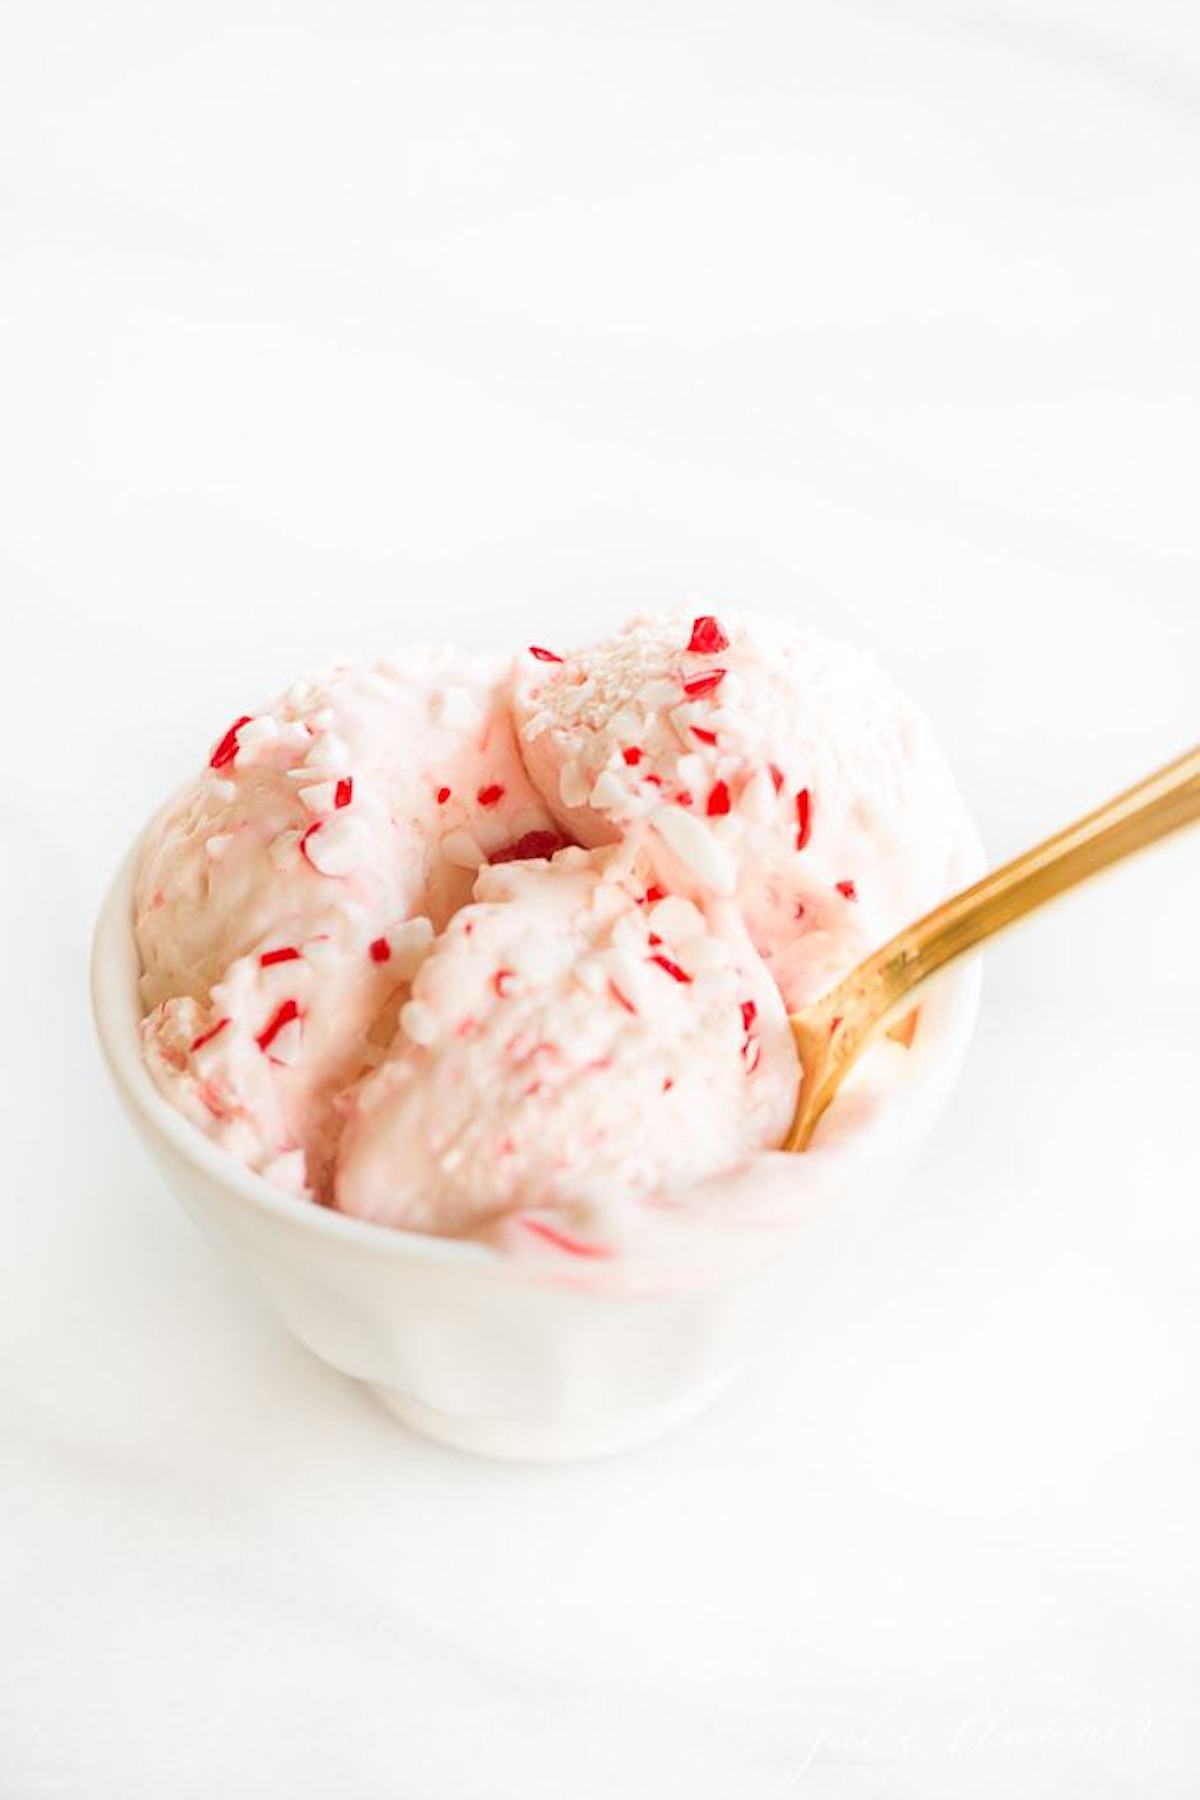 Peppermint ice cream in a white bowl with a gold spoon, featuring candy cane ice cream.